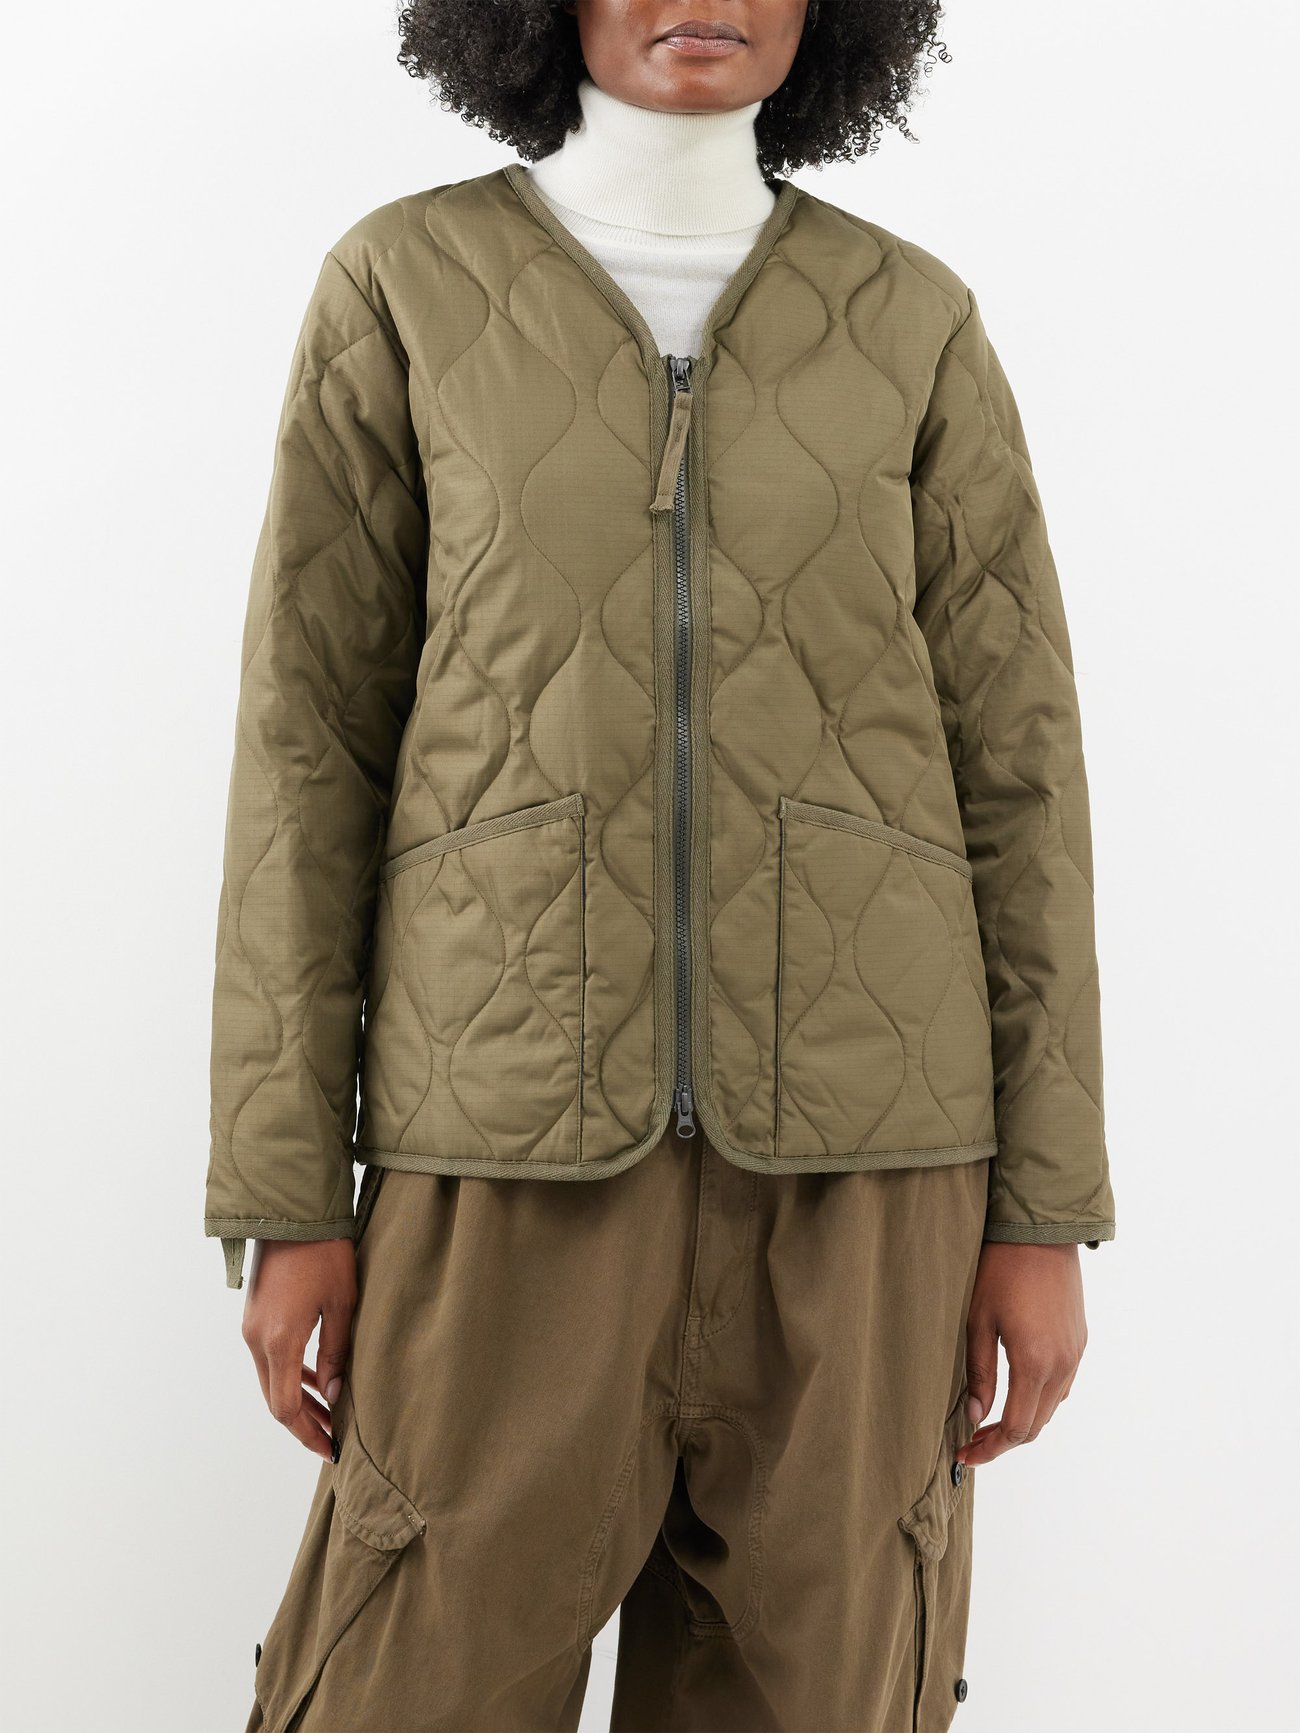 Green Military V-neck quilted down jacket | TAION | MATCHES UK